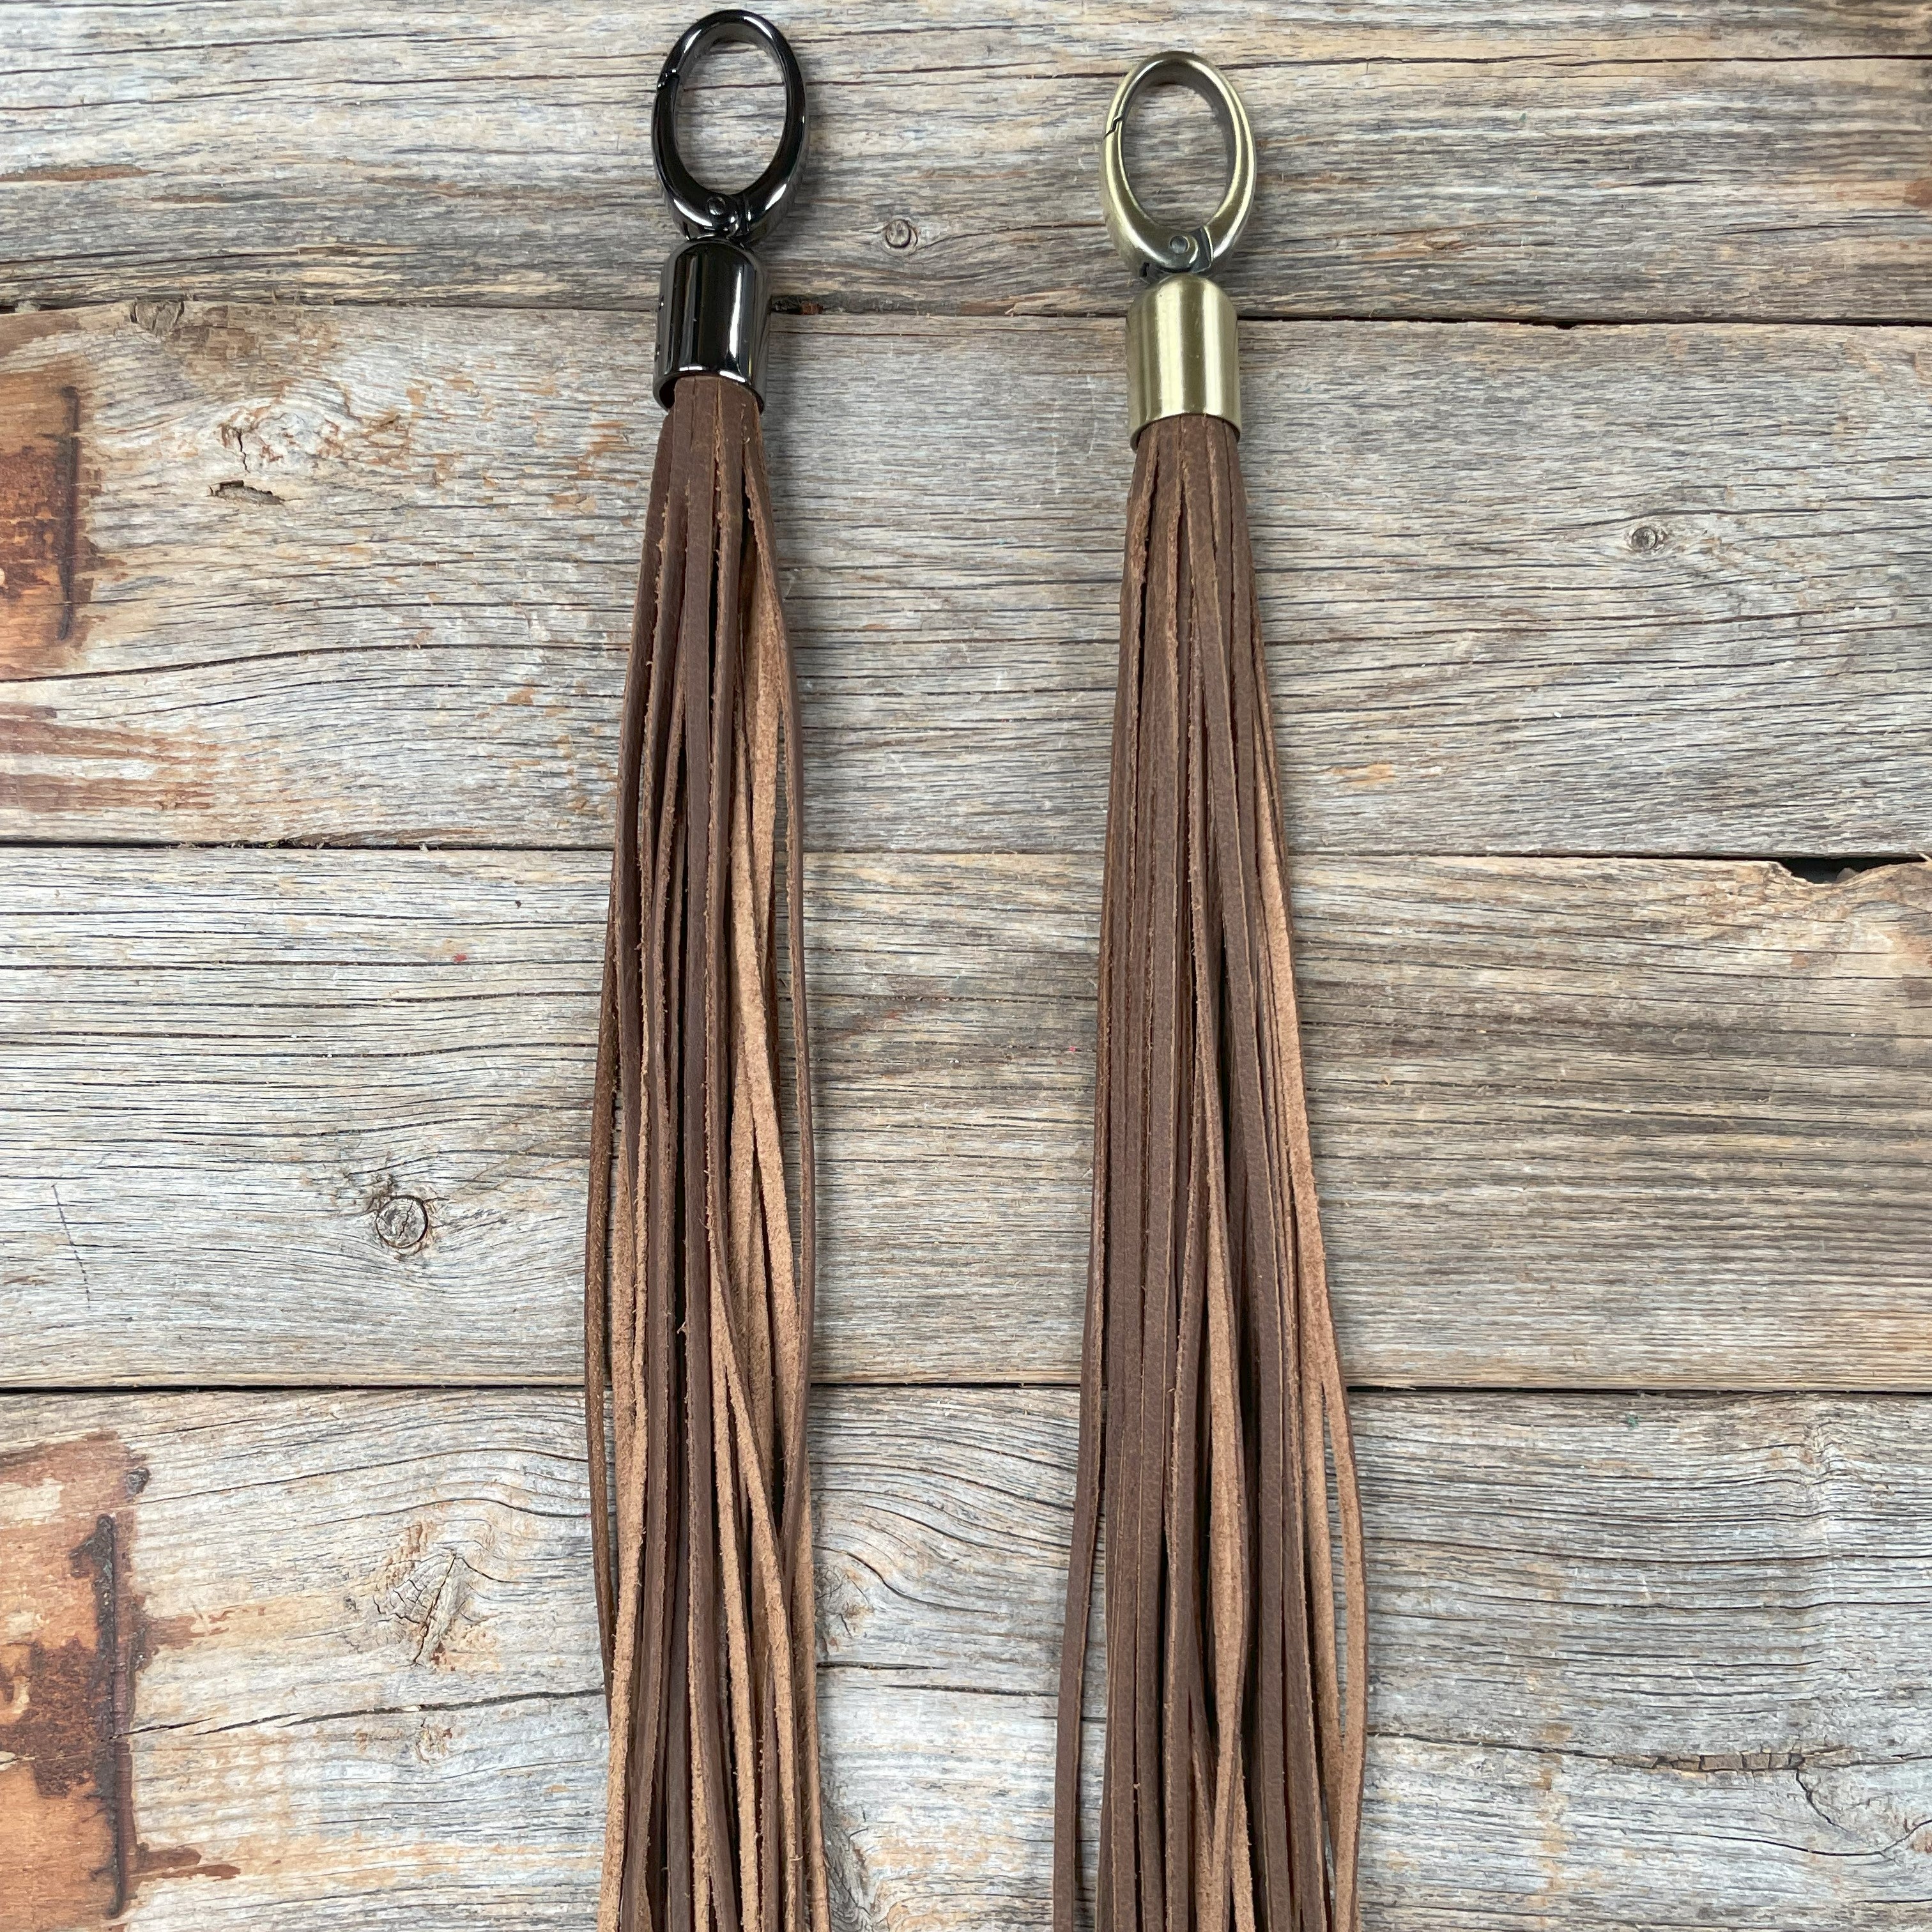 Fringe Snaps for Key Chains and Purses